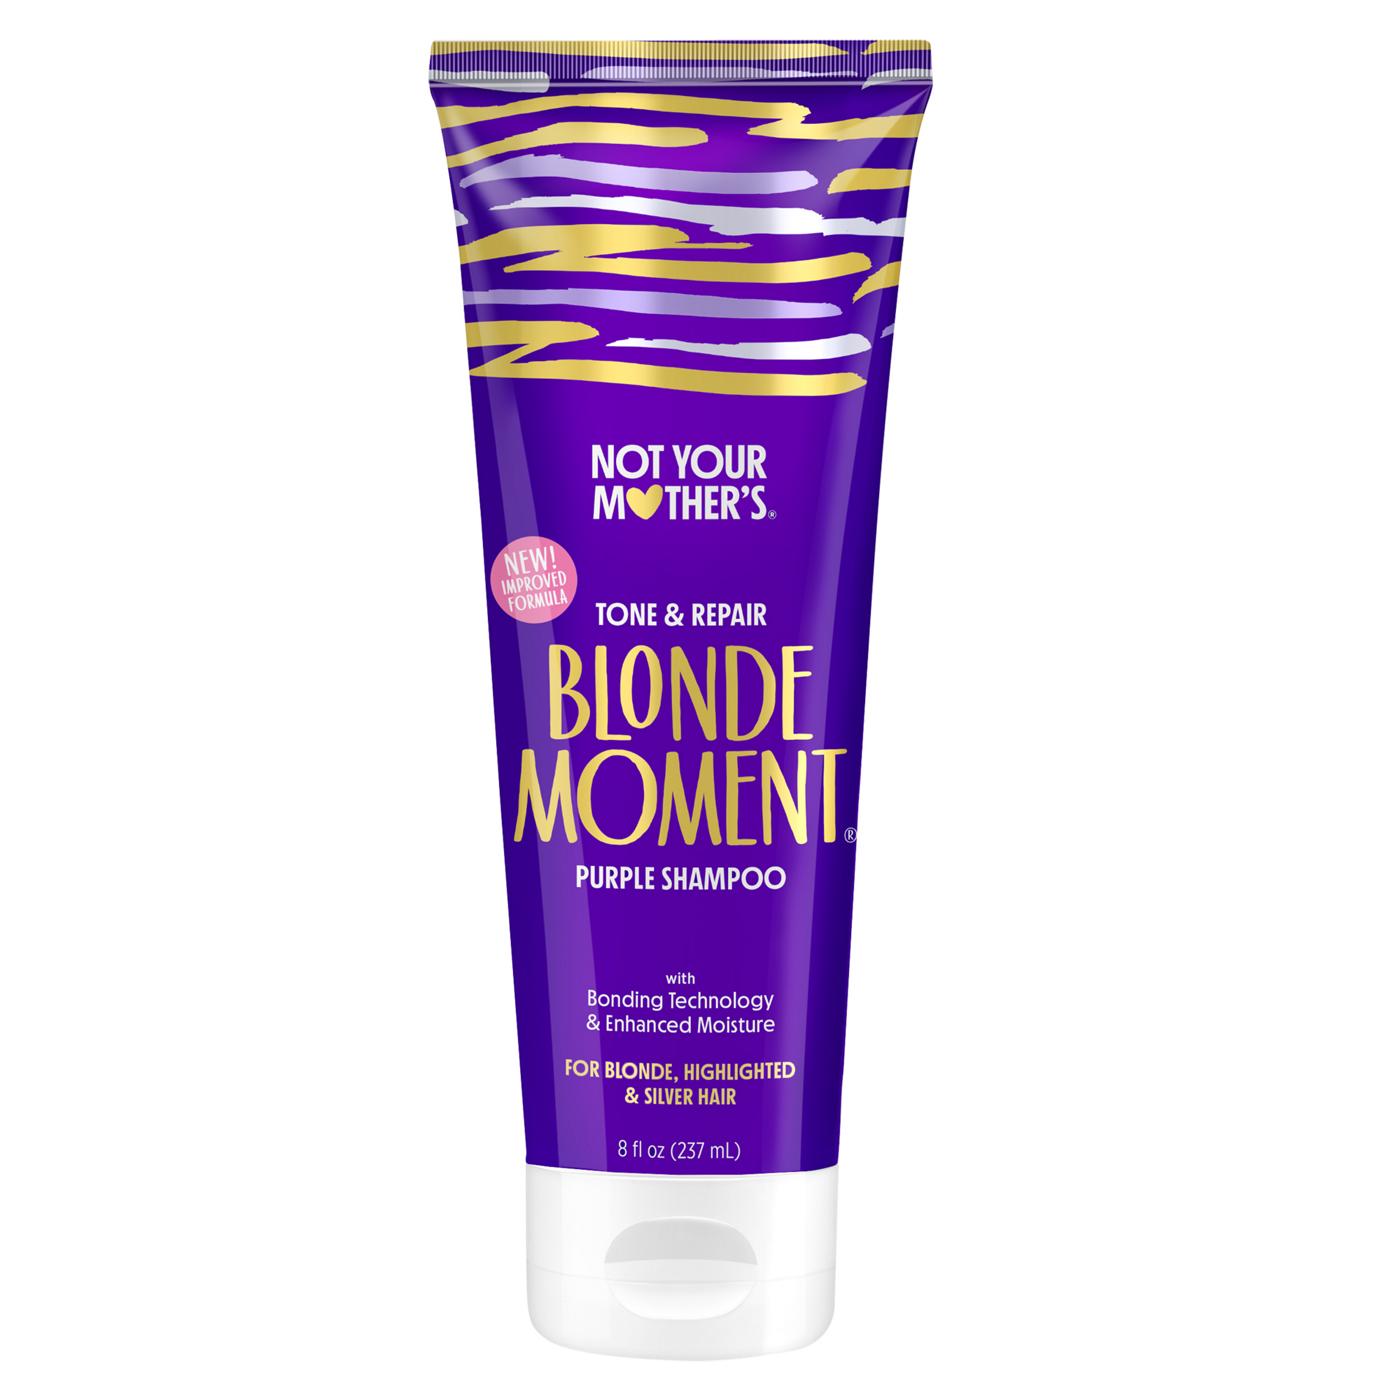 Not Your Mothers Blonde Moment Purple Treatment Shampoo Shop Shampoo And Conditioner At H E B